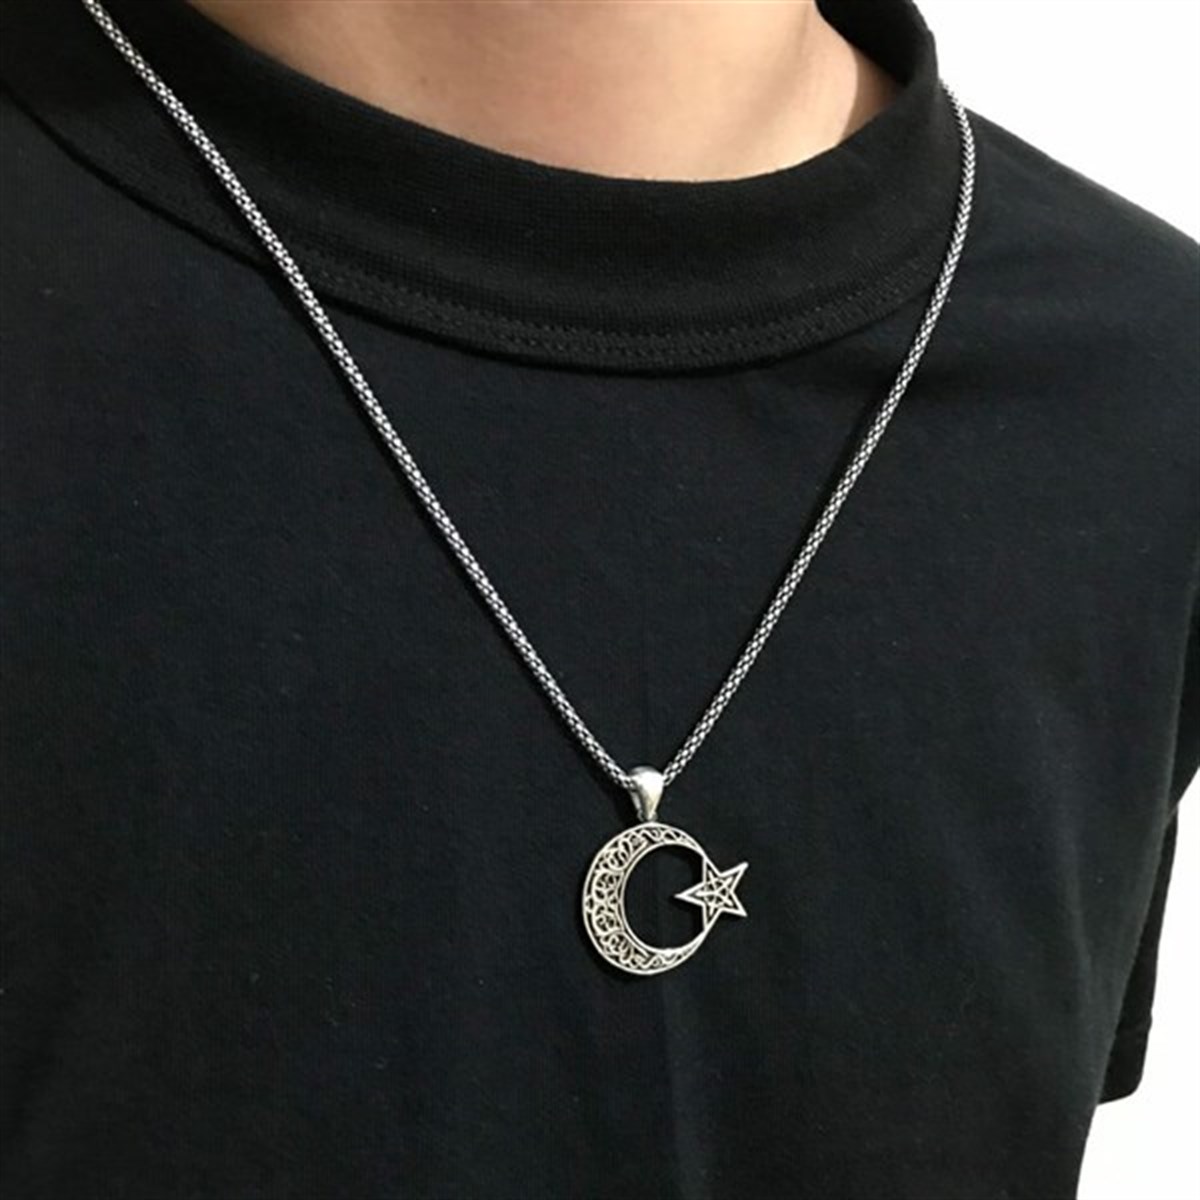 Embroidered Crescent and Star Silver Men's Necklace